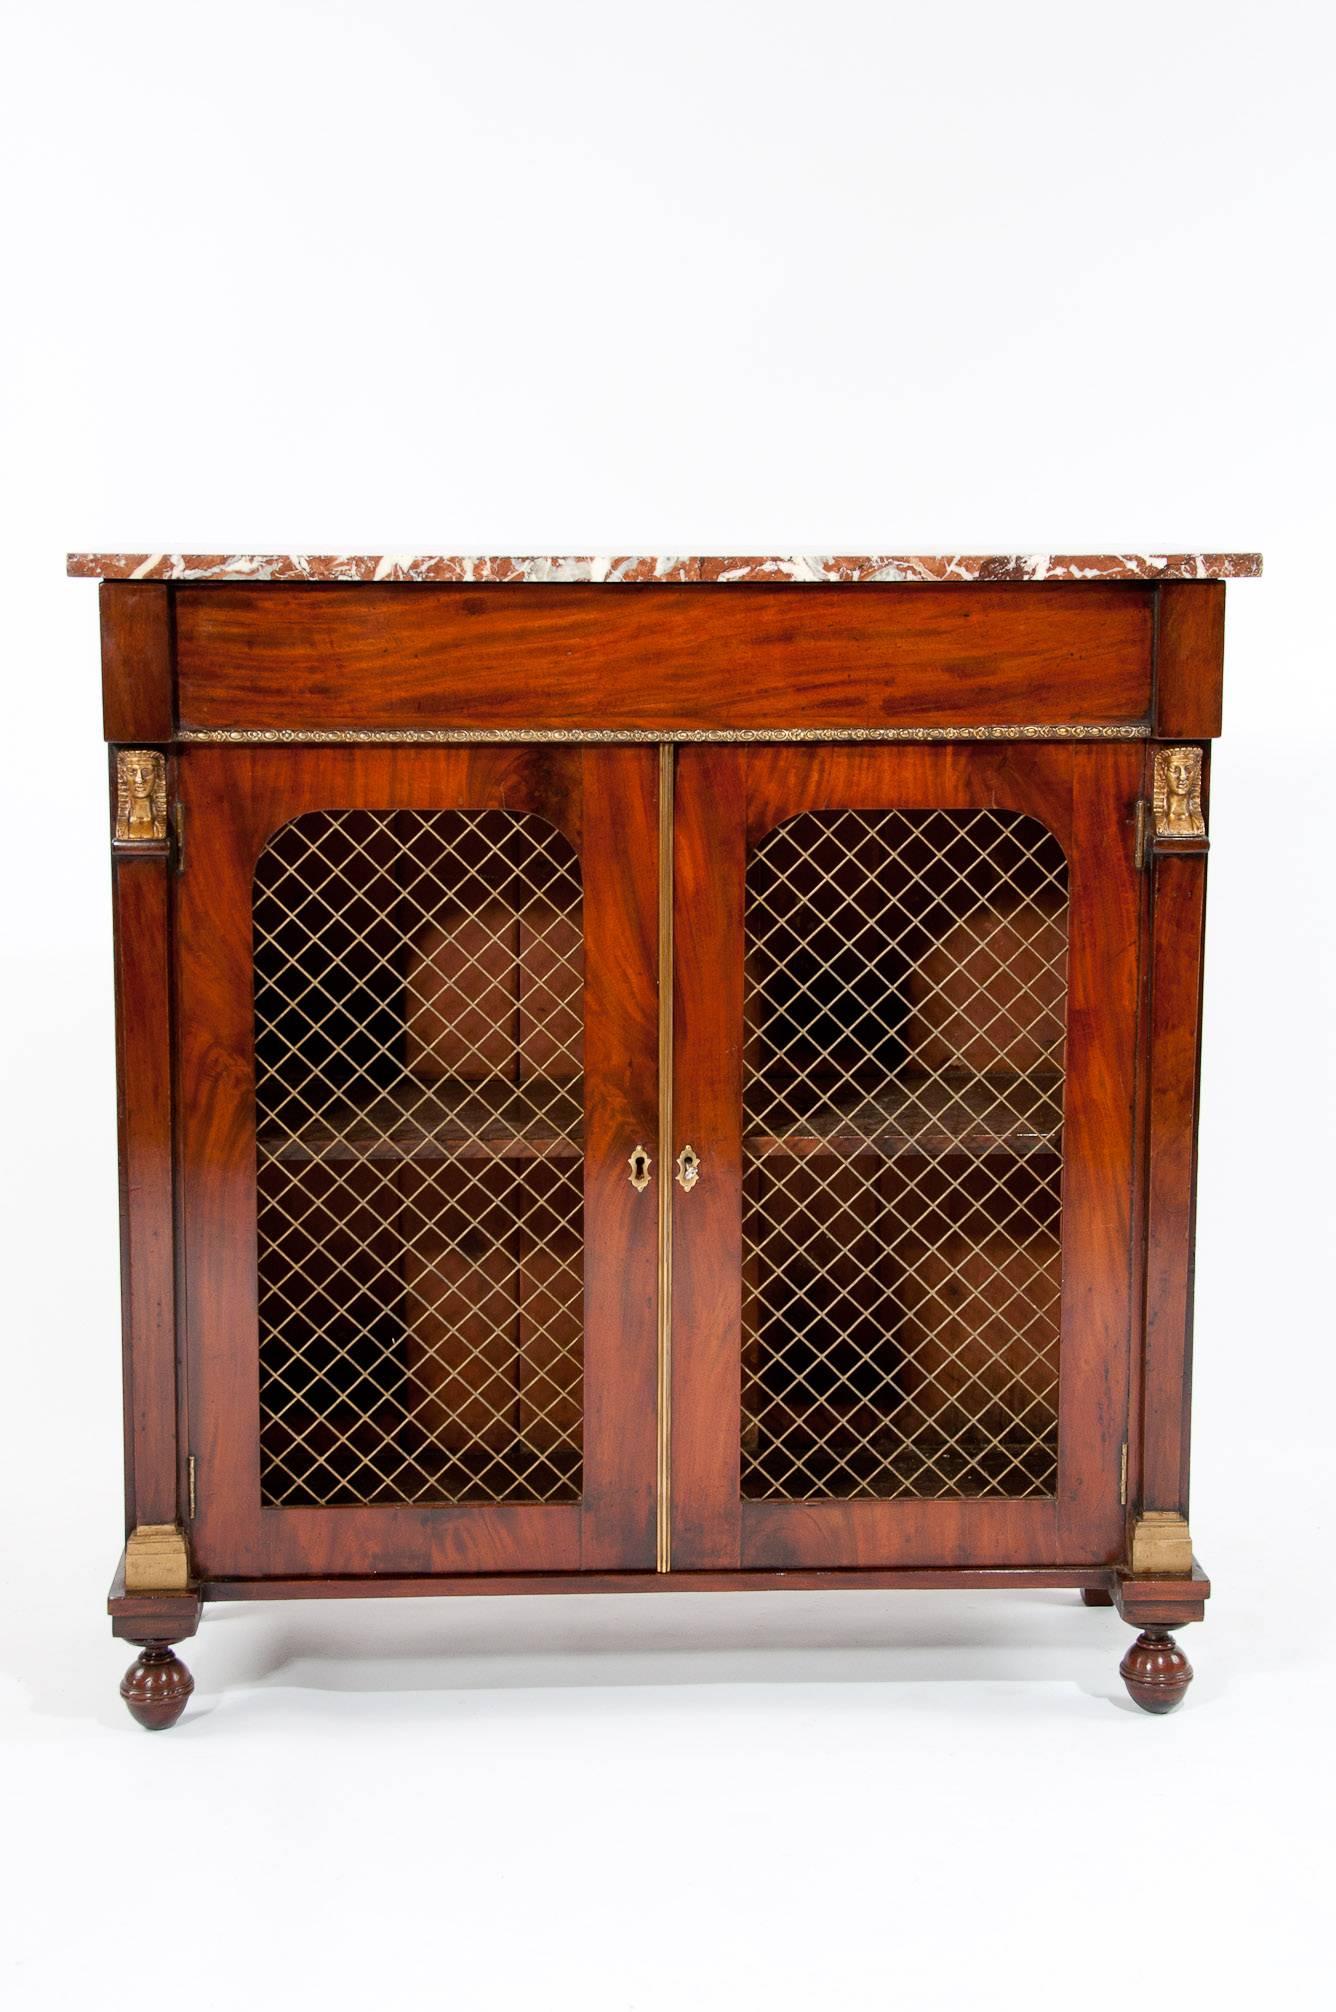 Early 19th Century Superb Regency Mahogany Marble-Topped Chiffonier